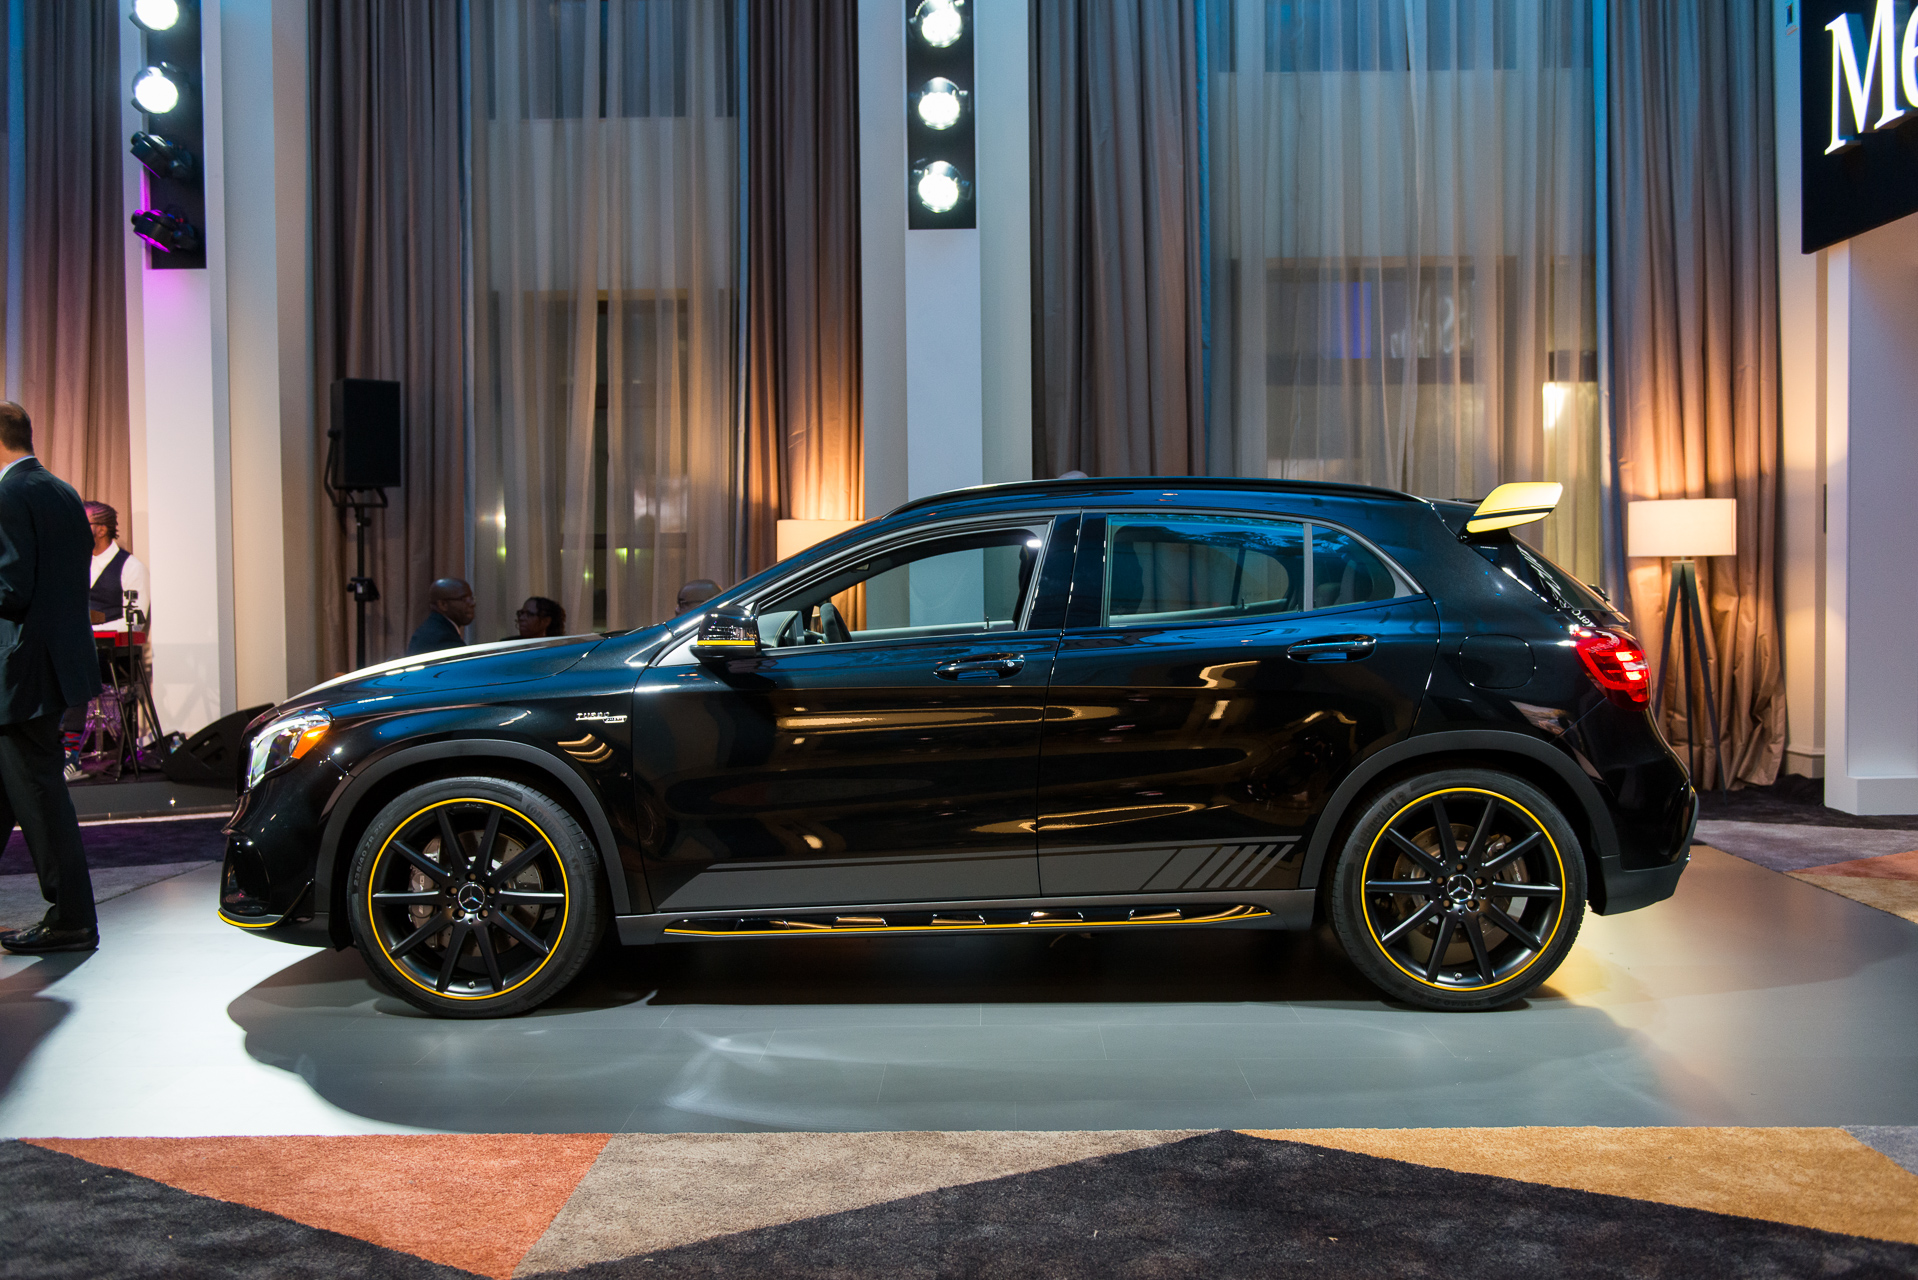 Mercedes Amg Gla45 And Cla45 To Get Black And Yellow Amg Performance Studio Package